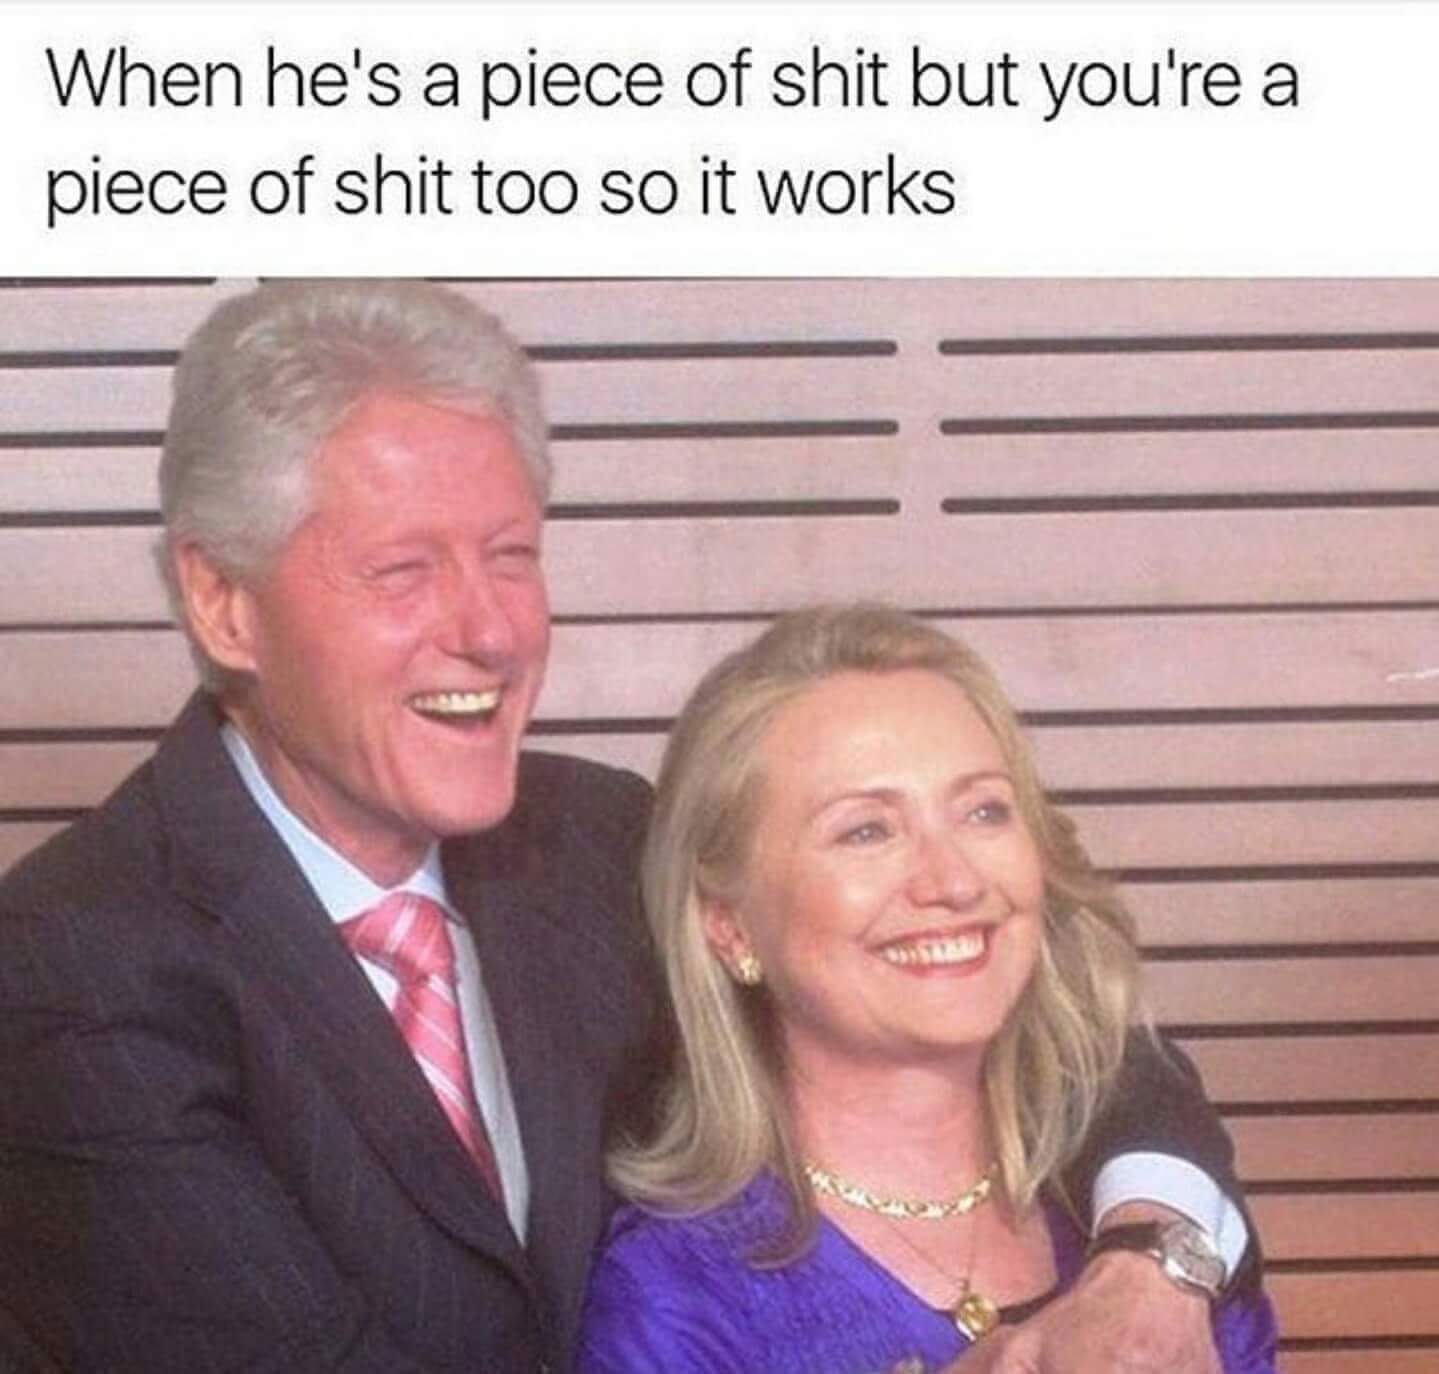 Savage Meme of the Clintons - When he's a piece of shit but you're a piece of shit too so it works